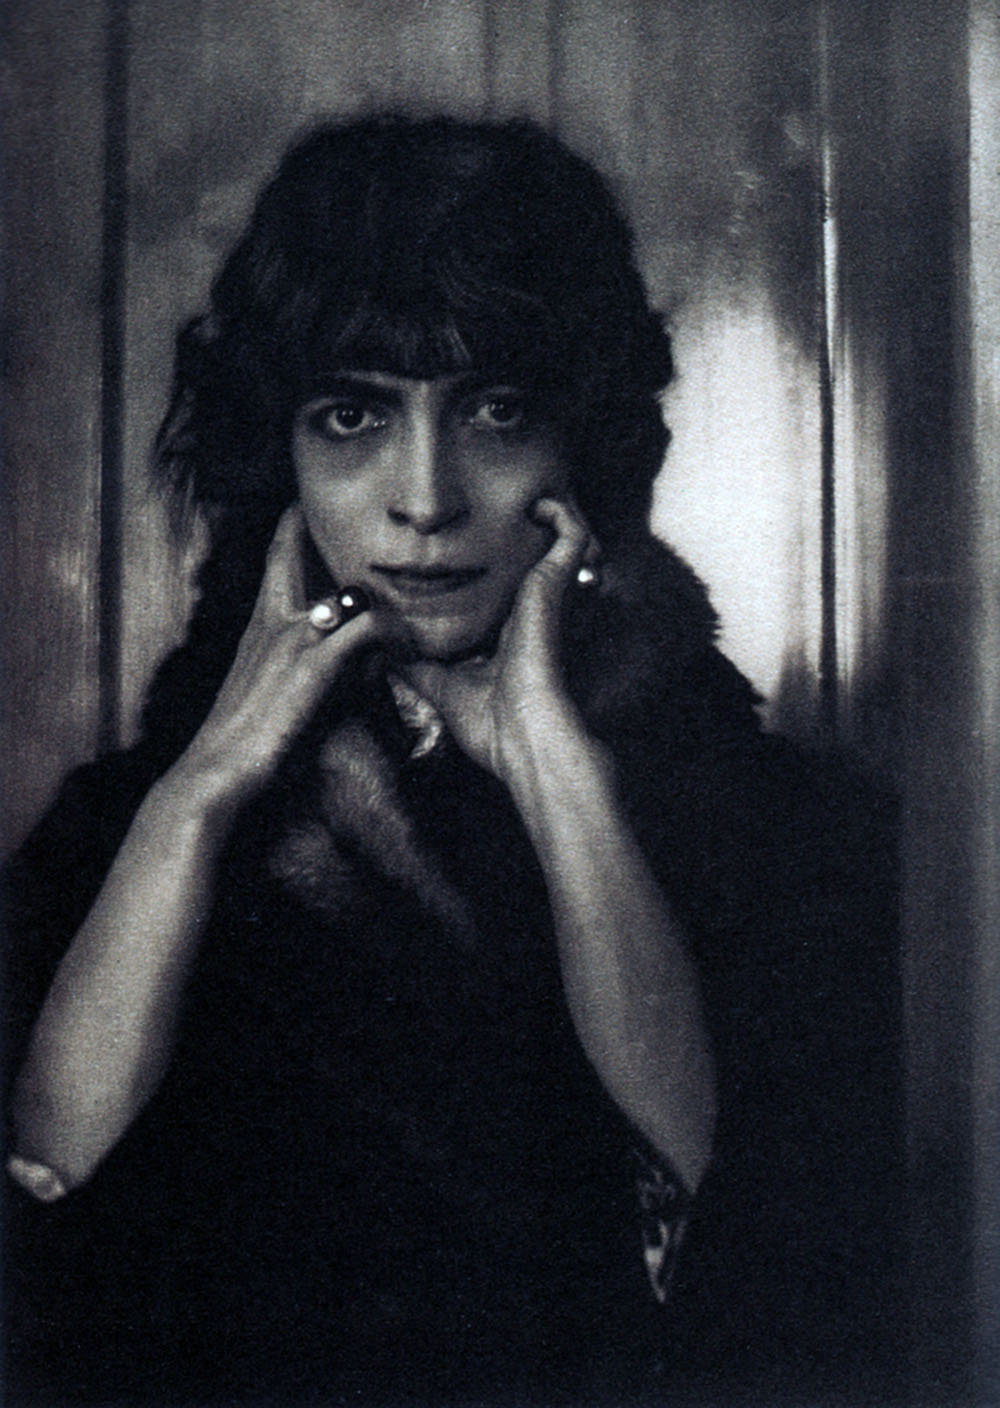 Her full name was Luisa, Marquise Casati Stampa di Soncino and she was an Italian heiress in the golden days of Europe. The first female dandy, she played muse to the biggest artists of her time, including photographer Man Ray. Even today she has inspired Karl Lagerfeld, John Galliano and Tom Ford.